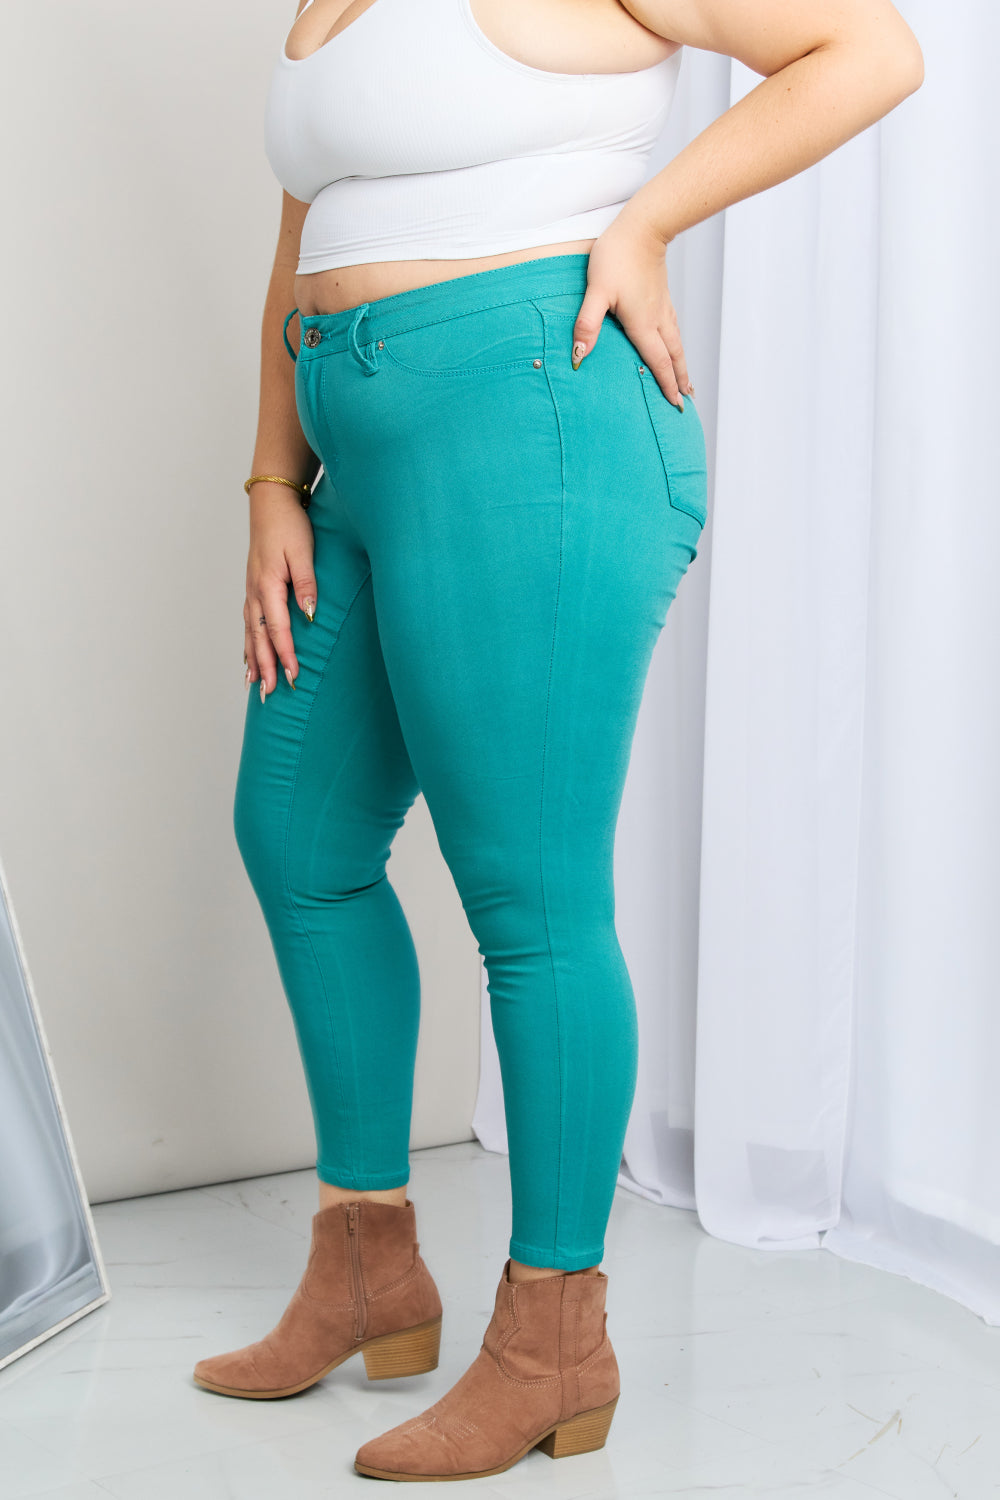 YMI Jeanswear Kate Hyper-Stretch Full Size Mid-Rise Skinny Jeans in Sea Green COCO CRESS